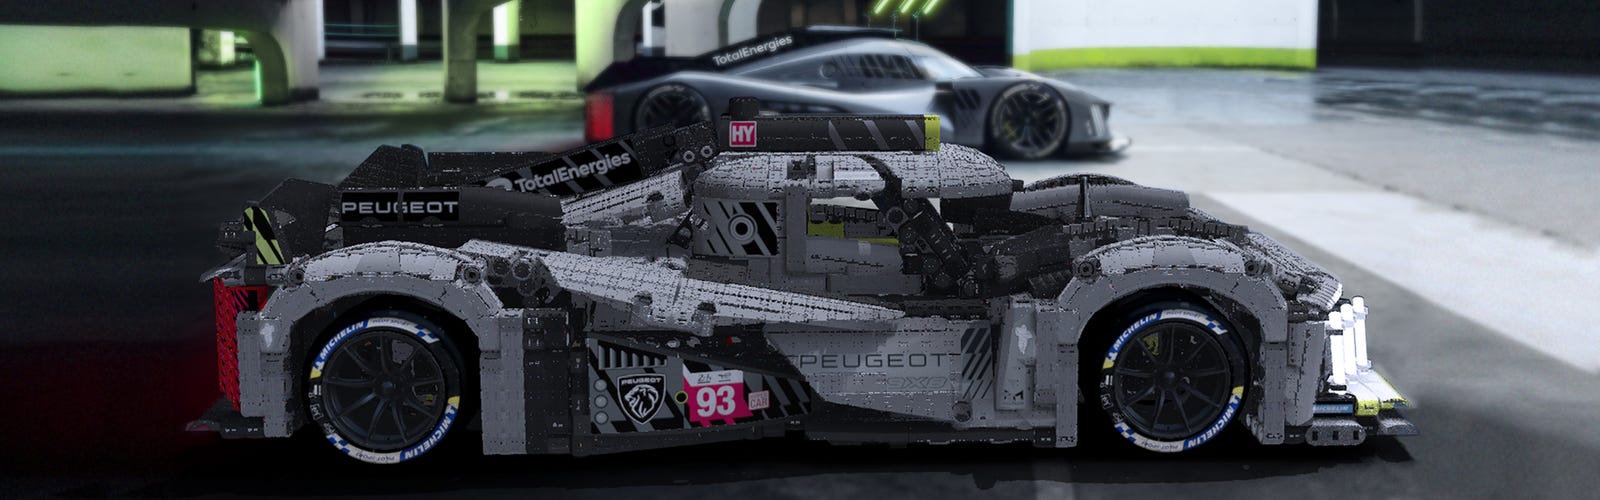 Scaling up a Le Mans Hypercar with LEGO® elements